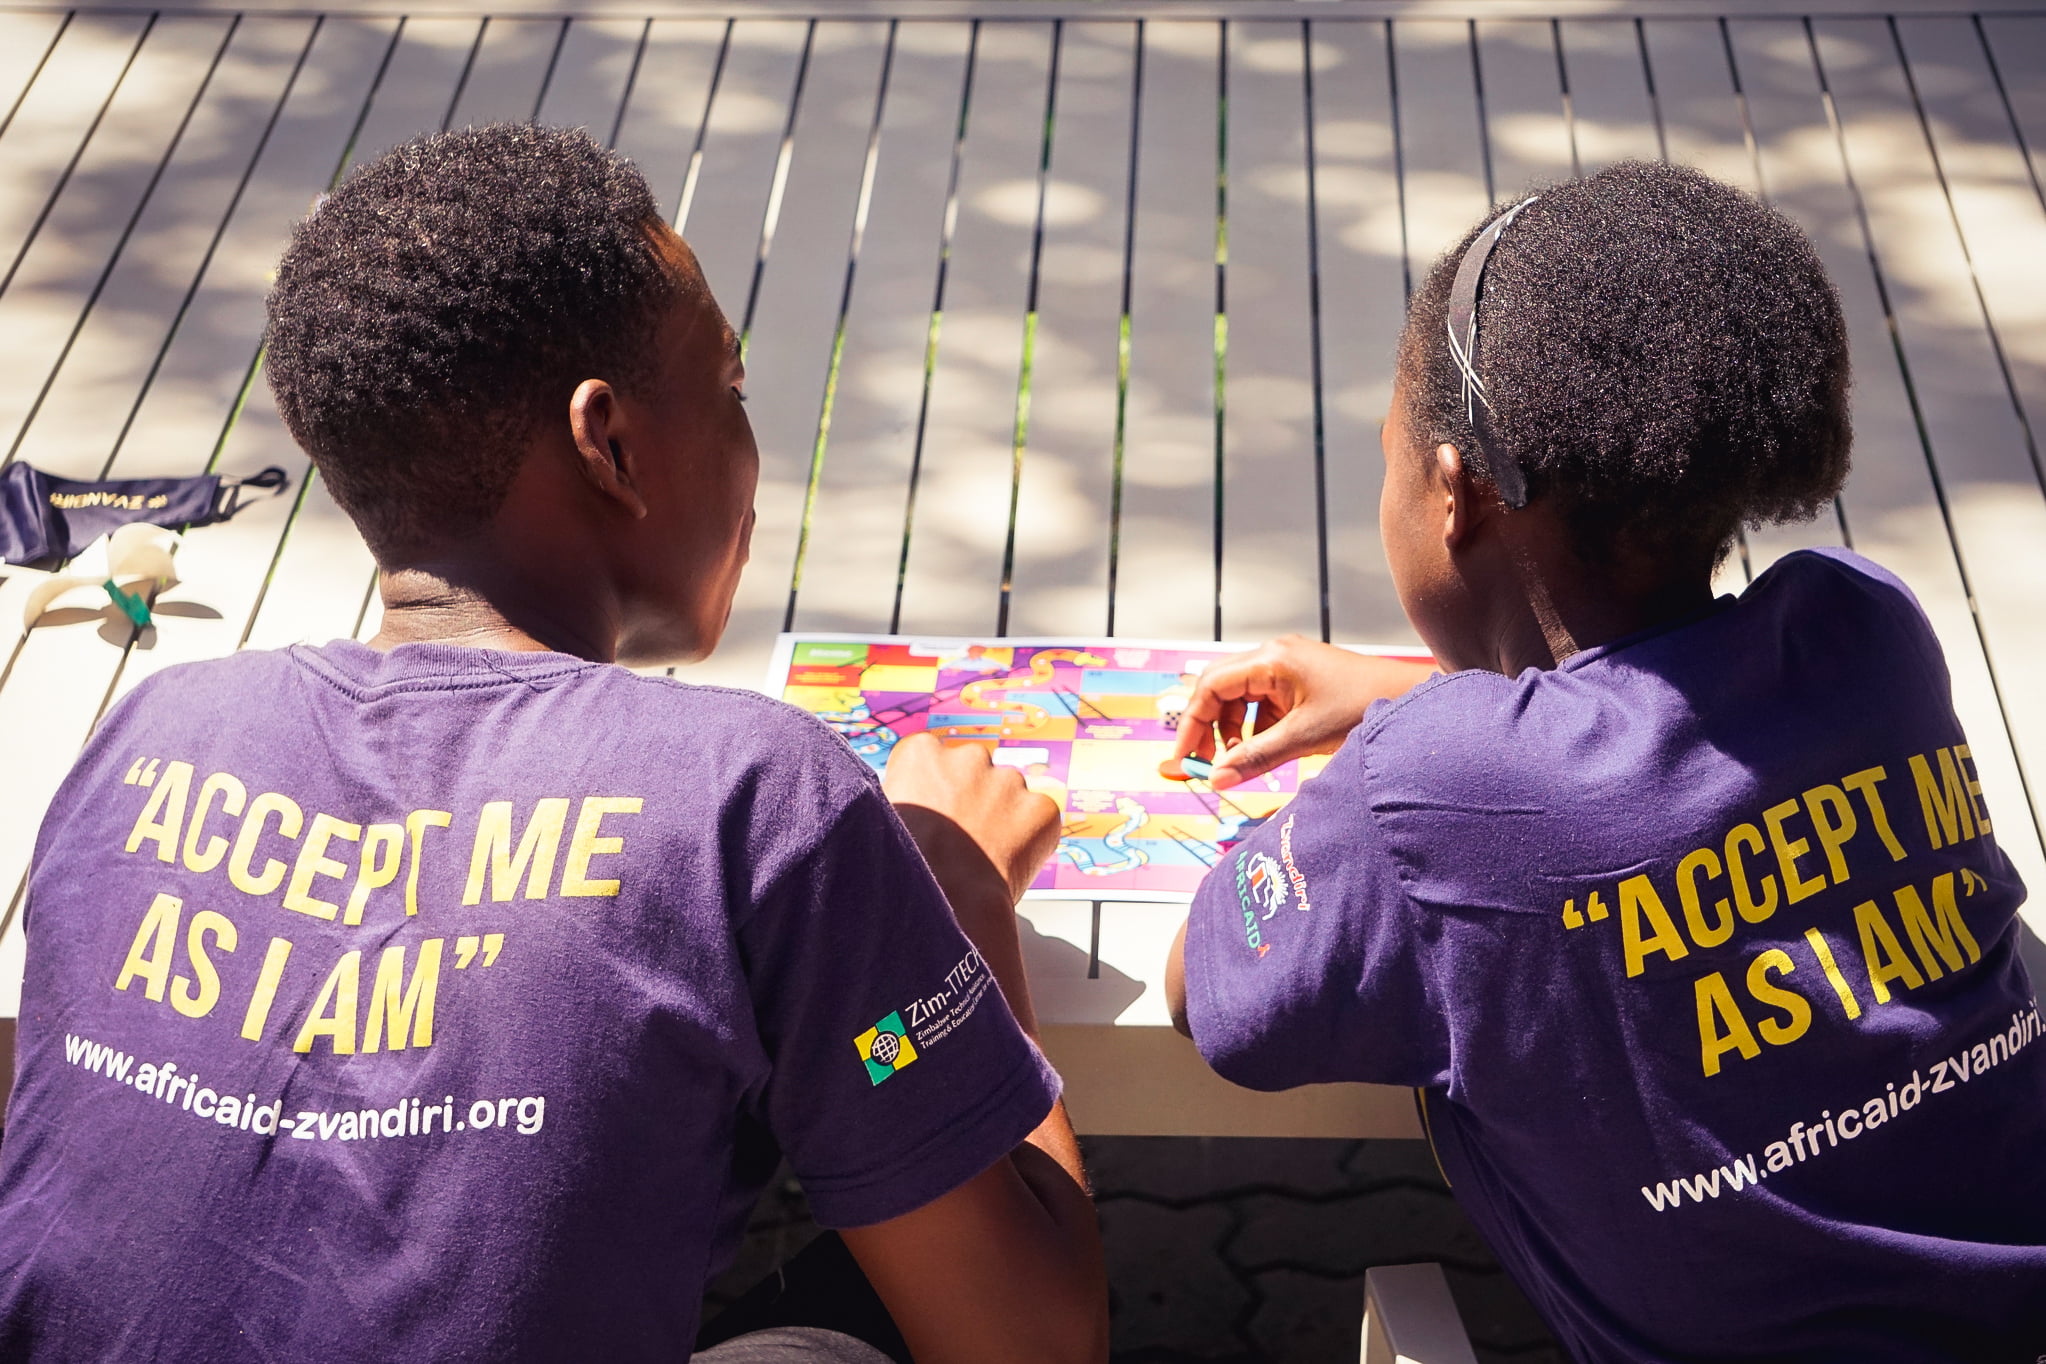 A male and female African youth playing a board game, wearing t-shirts that read "Accept me as I am."